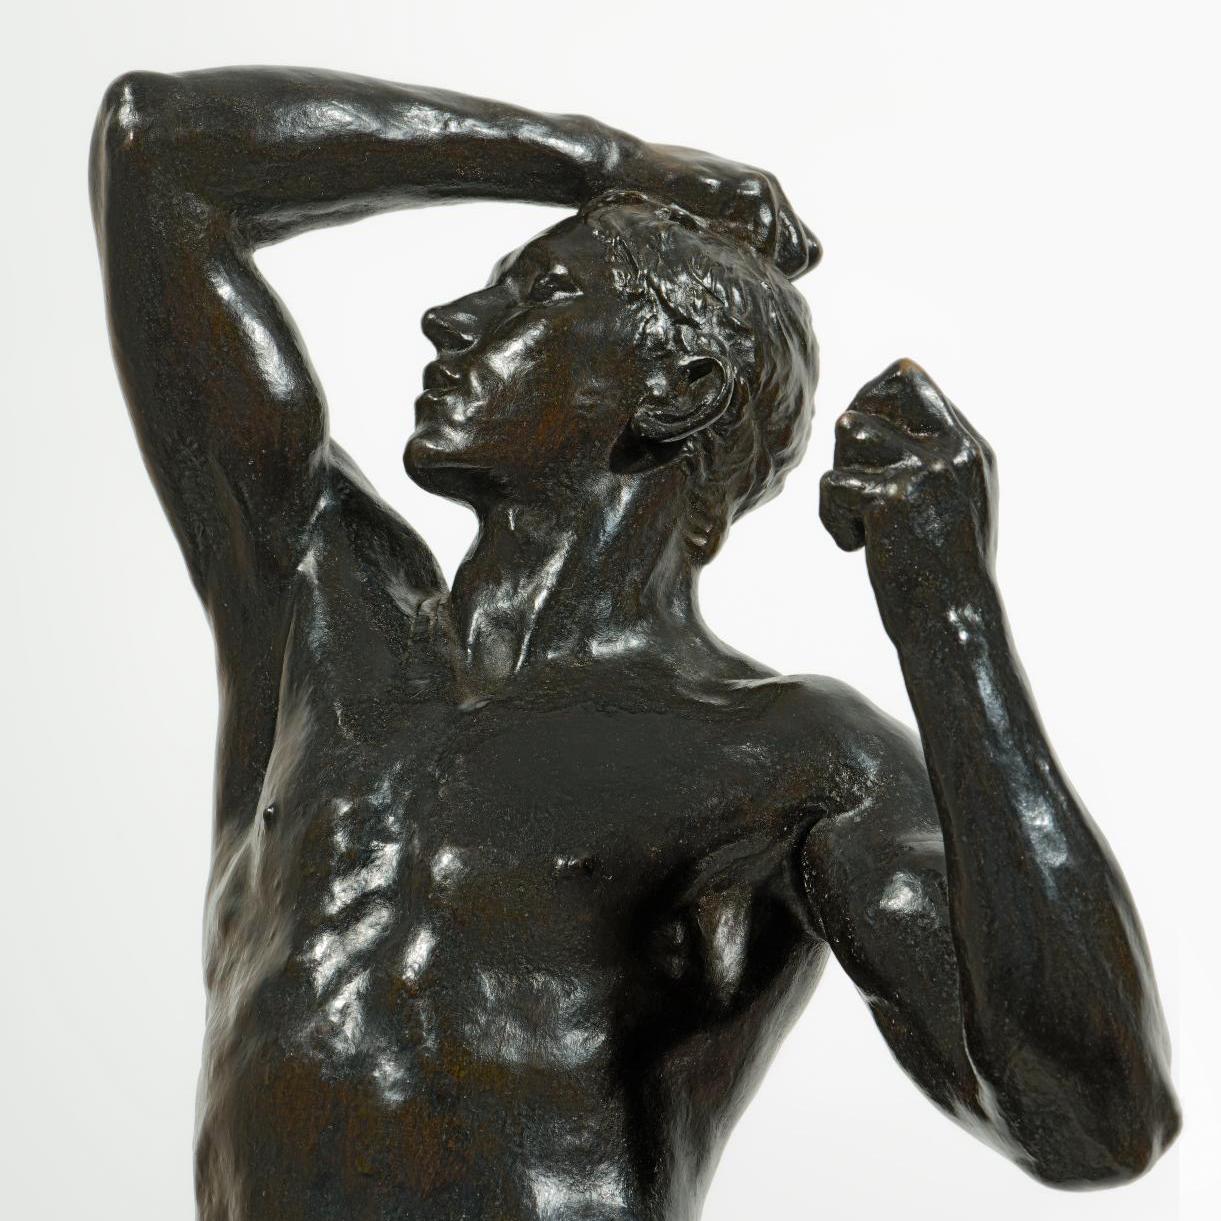 Pre-sale - "The Age of Bronze": Auguste Rodin's First "Success"